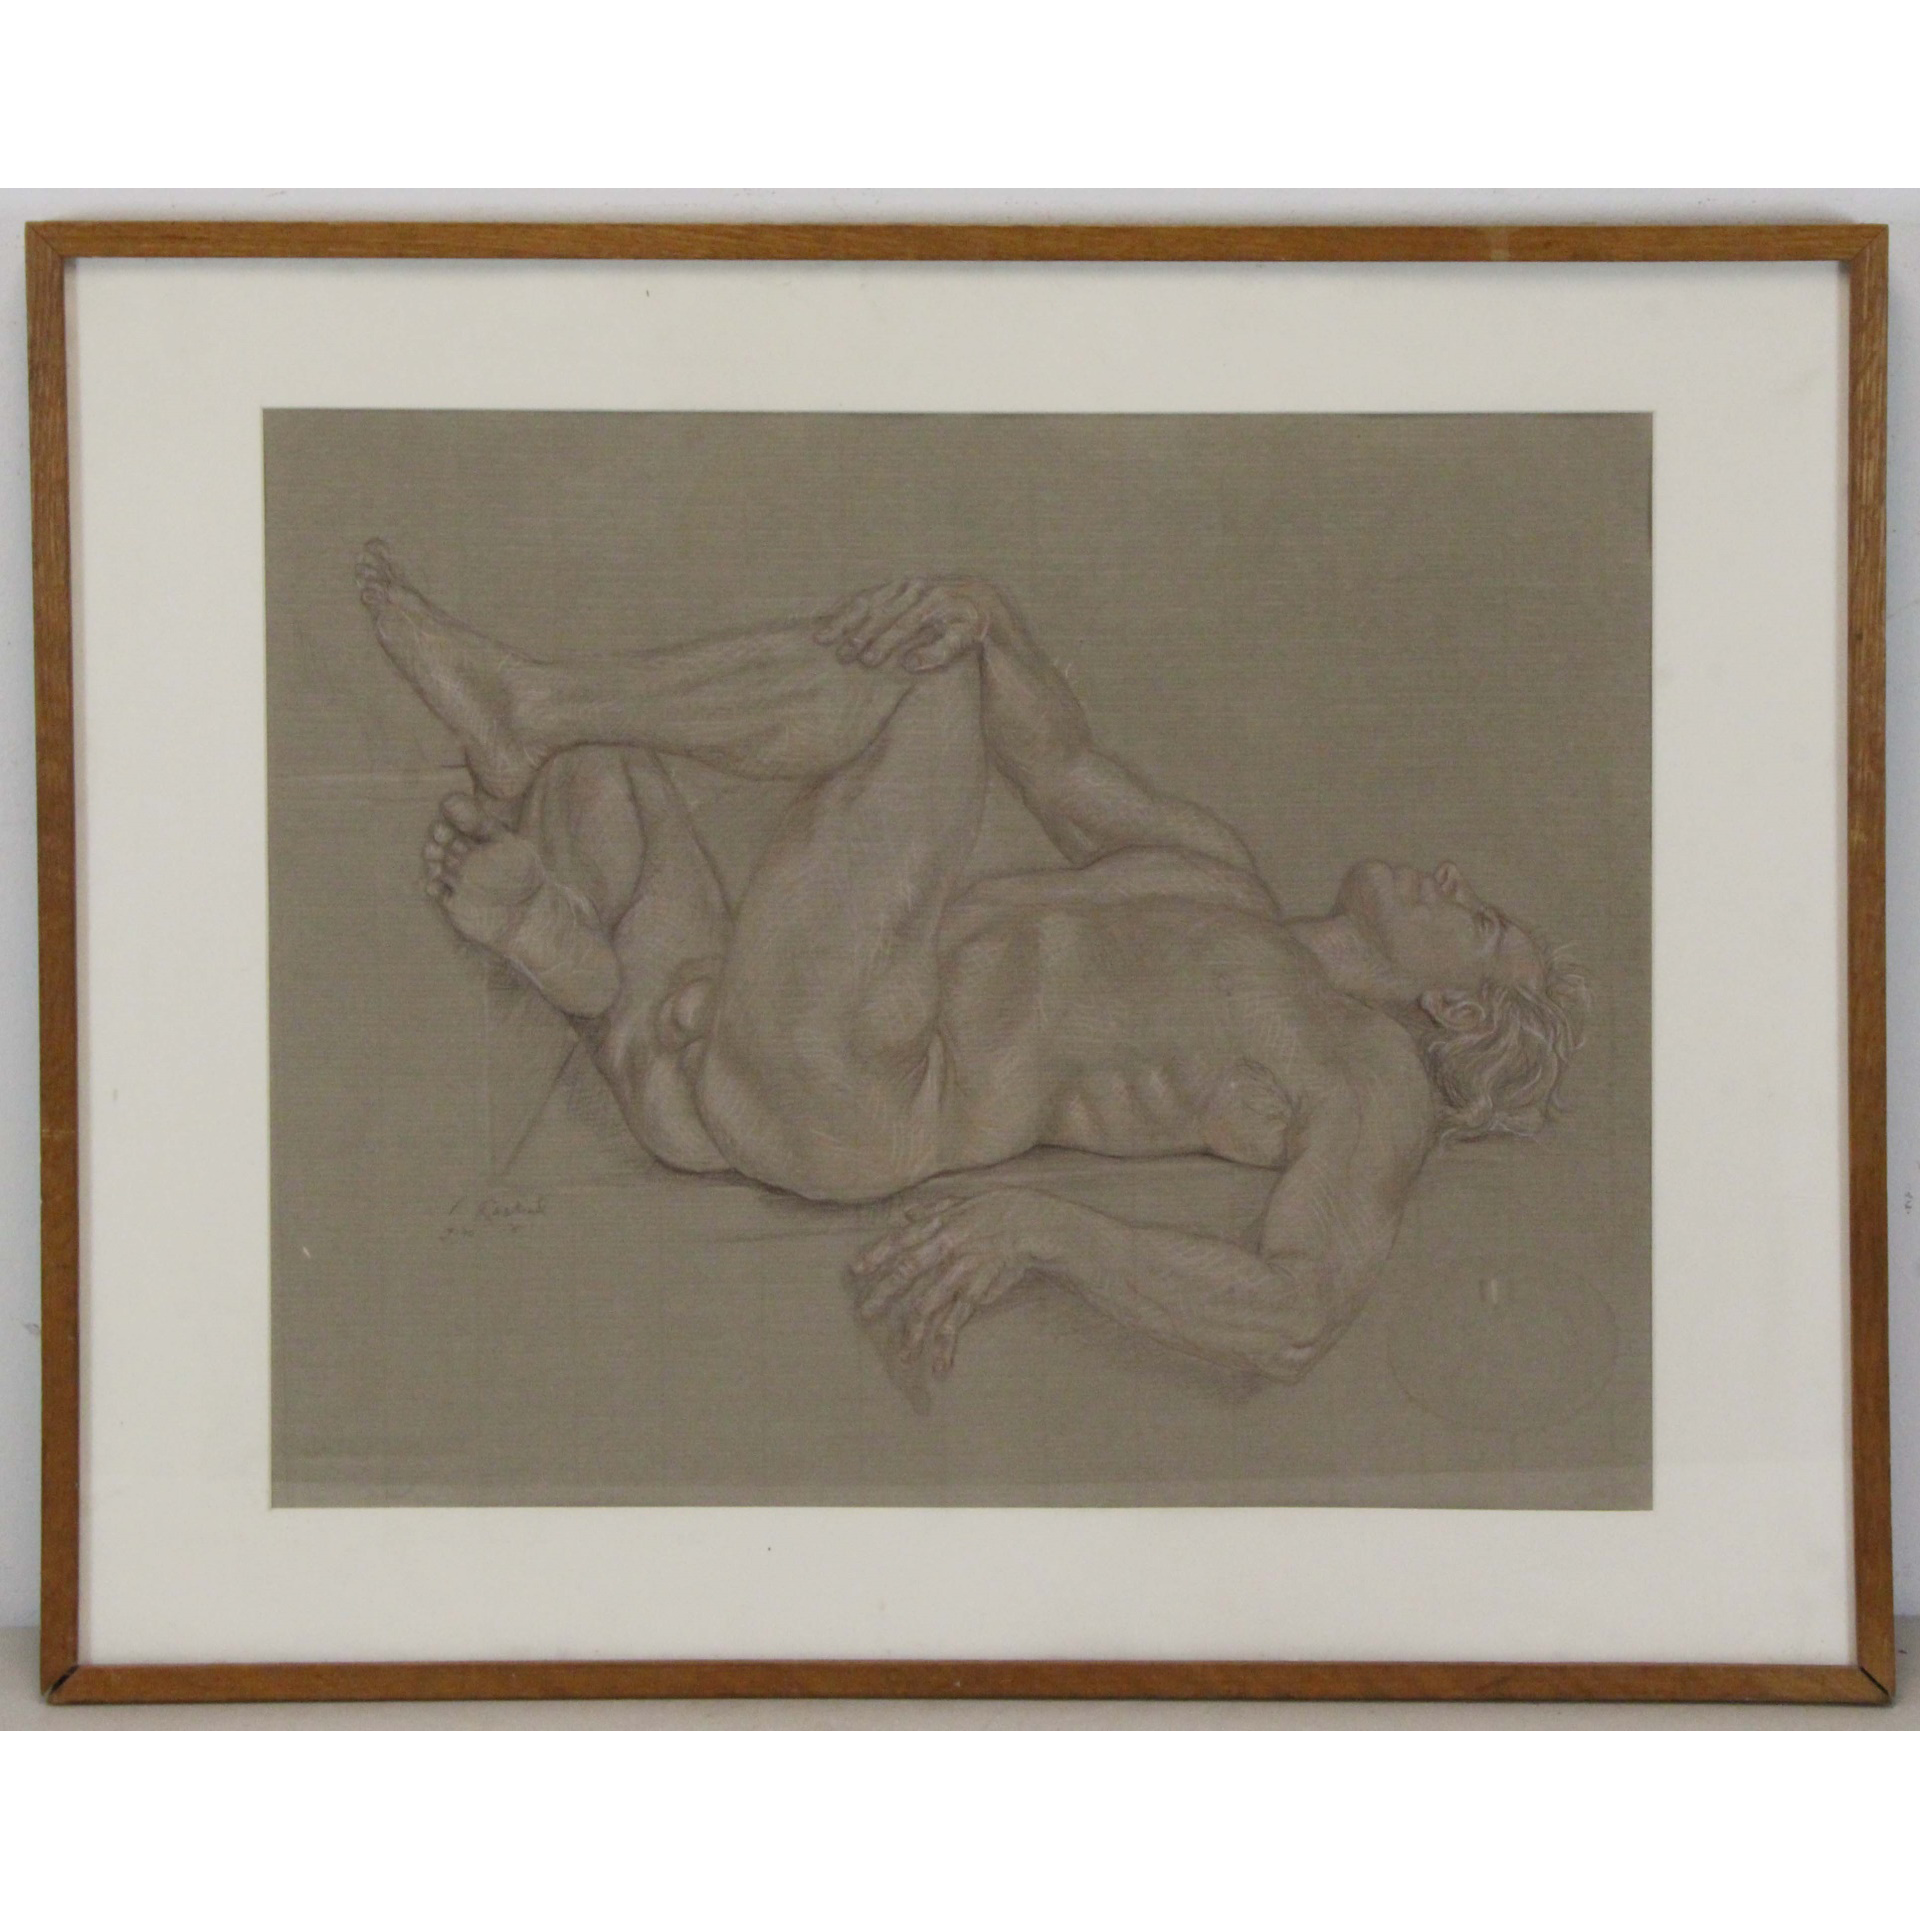 AW5-011: Phylis Raskind - Male Nude - Crayon On Paper